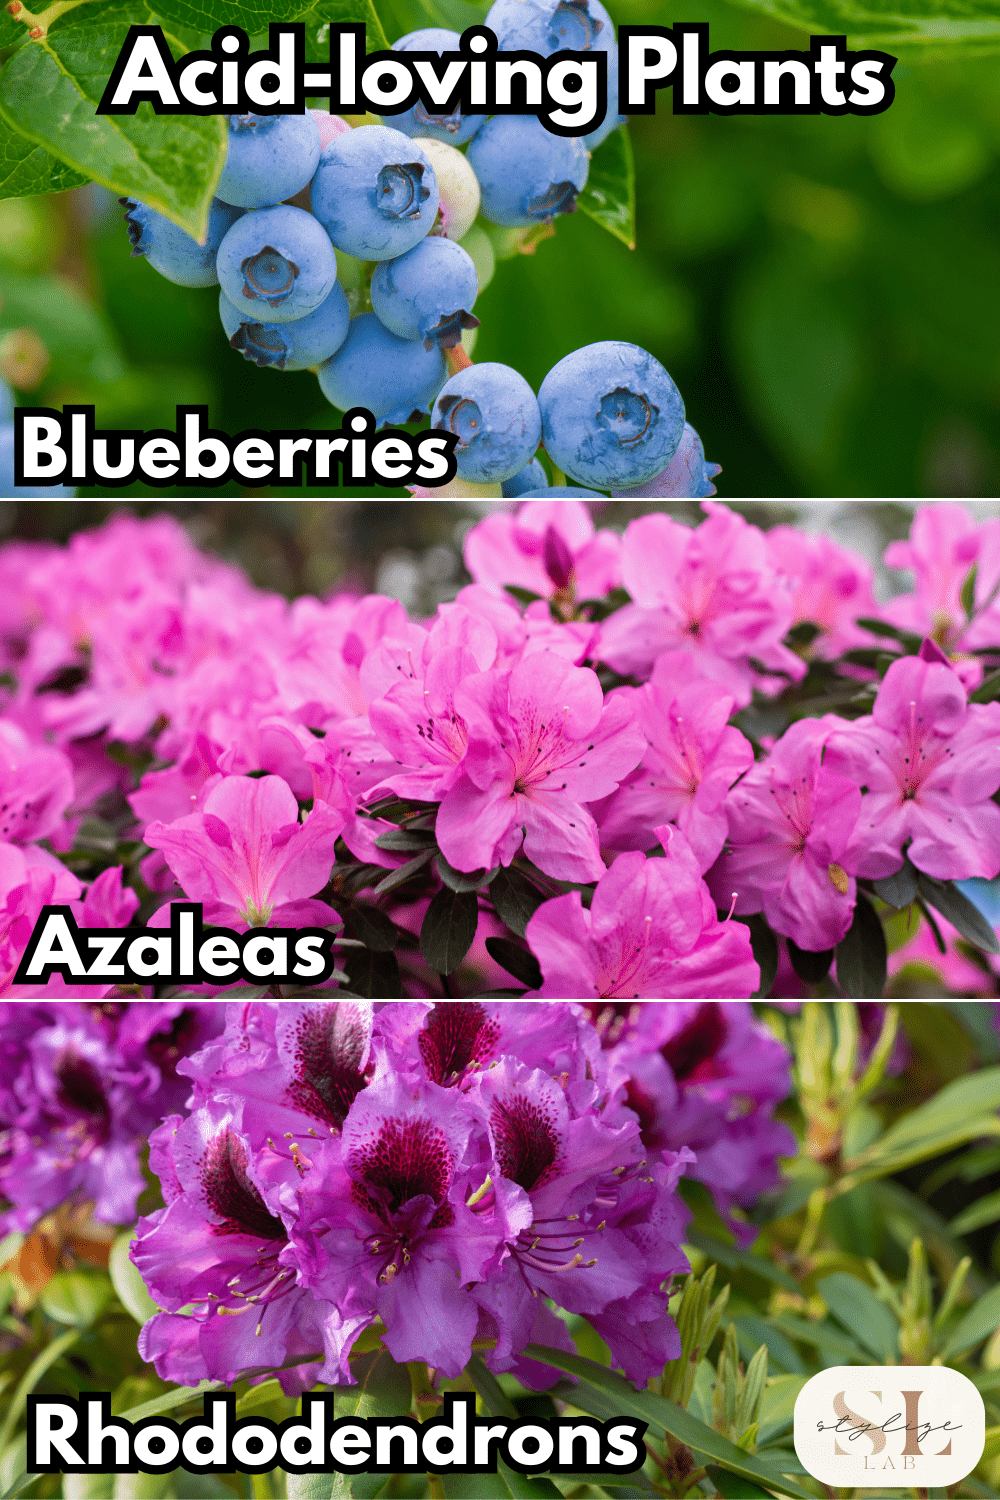 Acid-Loving Plants blueberries, azaleas and rhododendrons